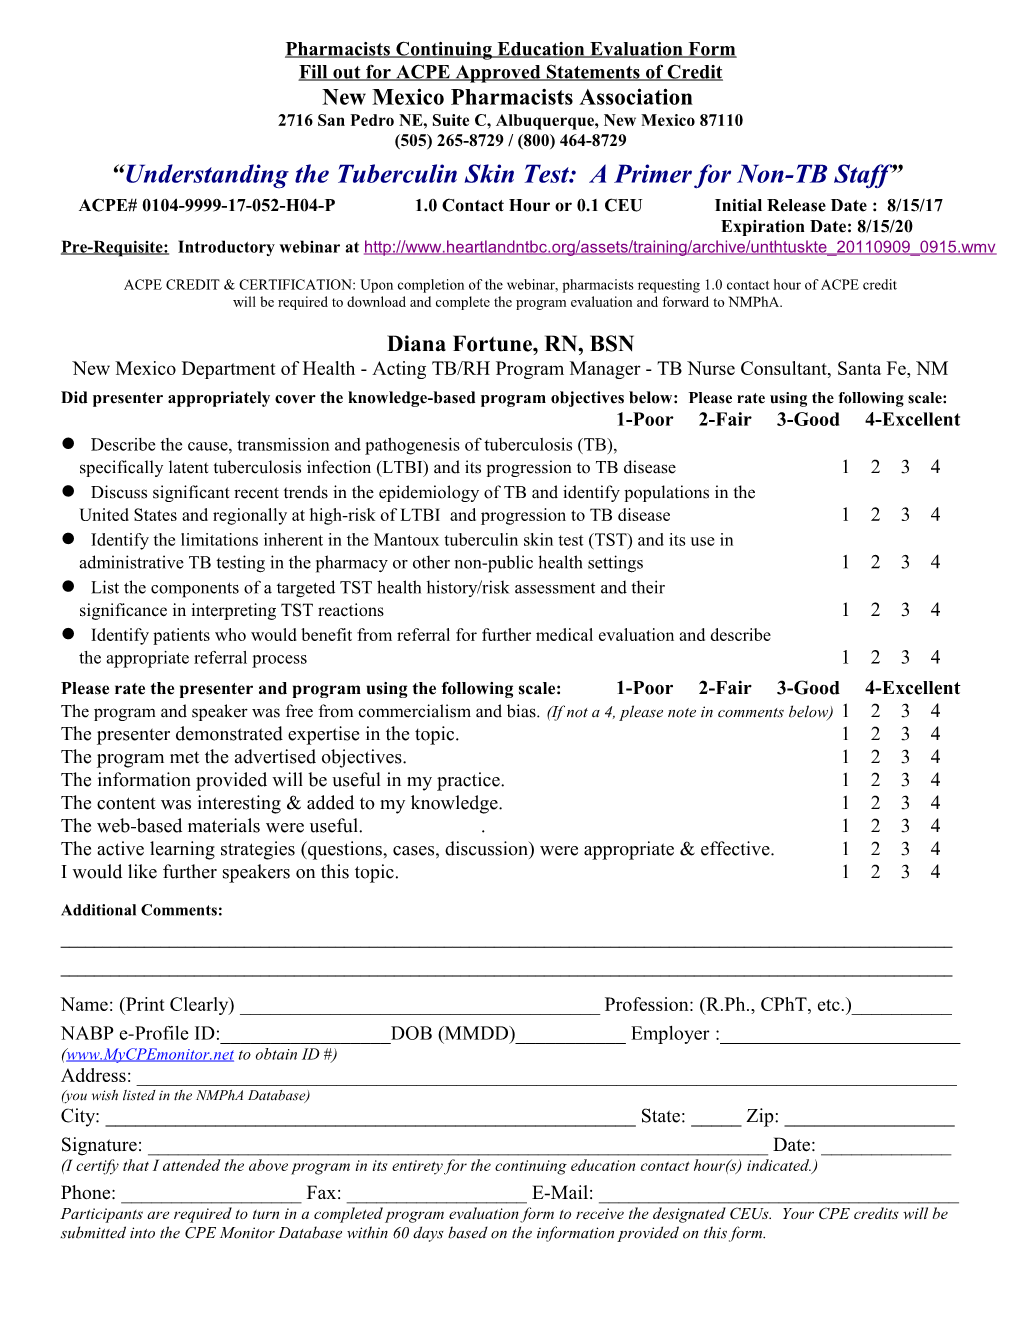 Continuing Education Evaluation Form - Fill out to Get CE Credit